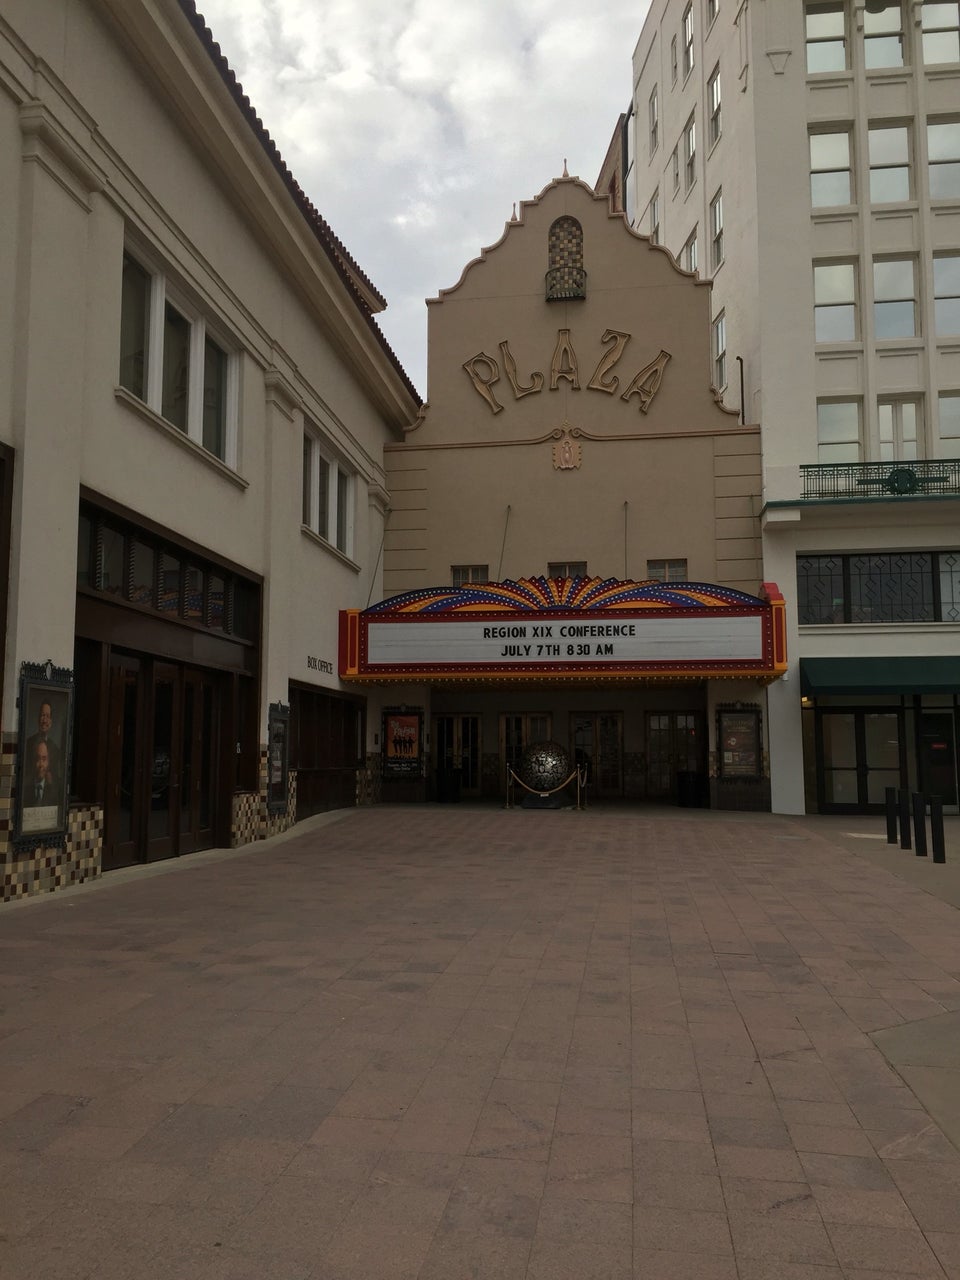 Photo of The Plaza Theatre Performing Arts Center